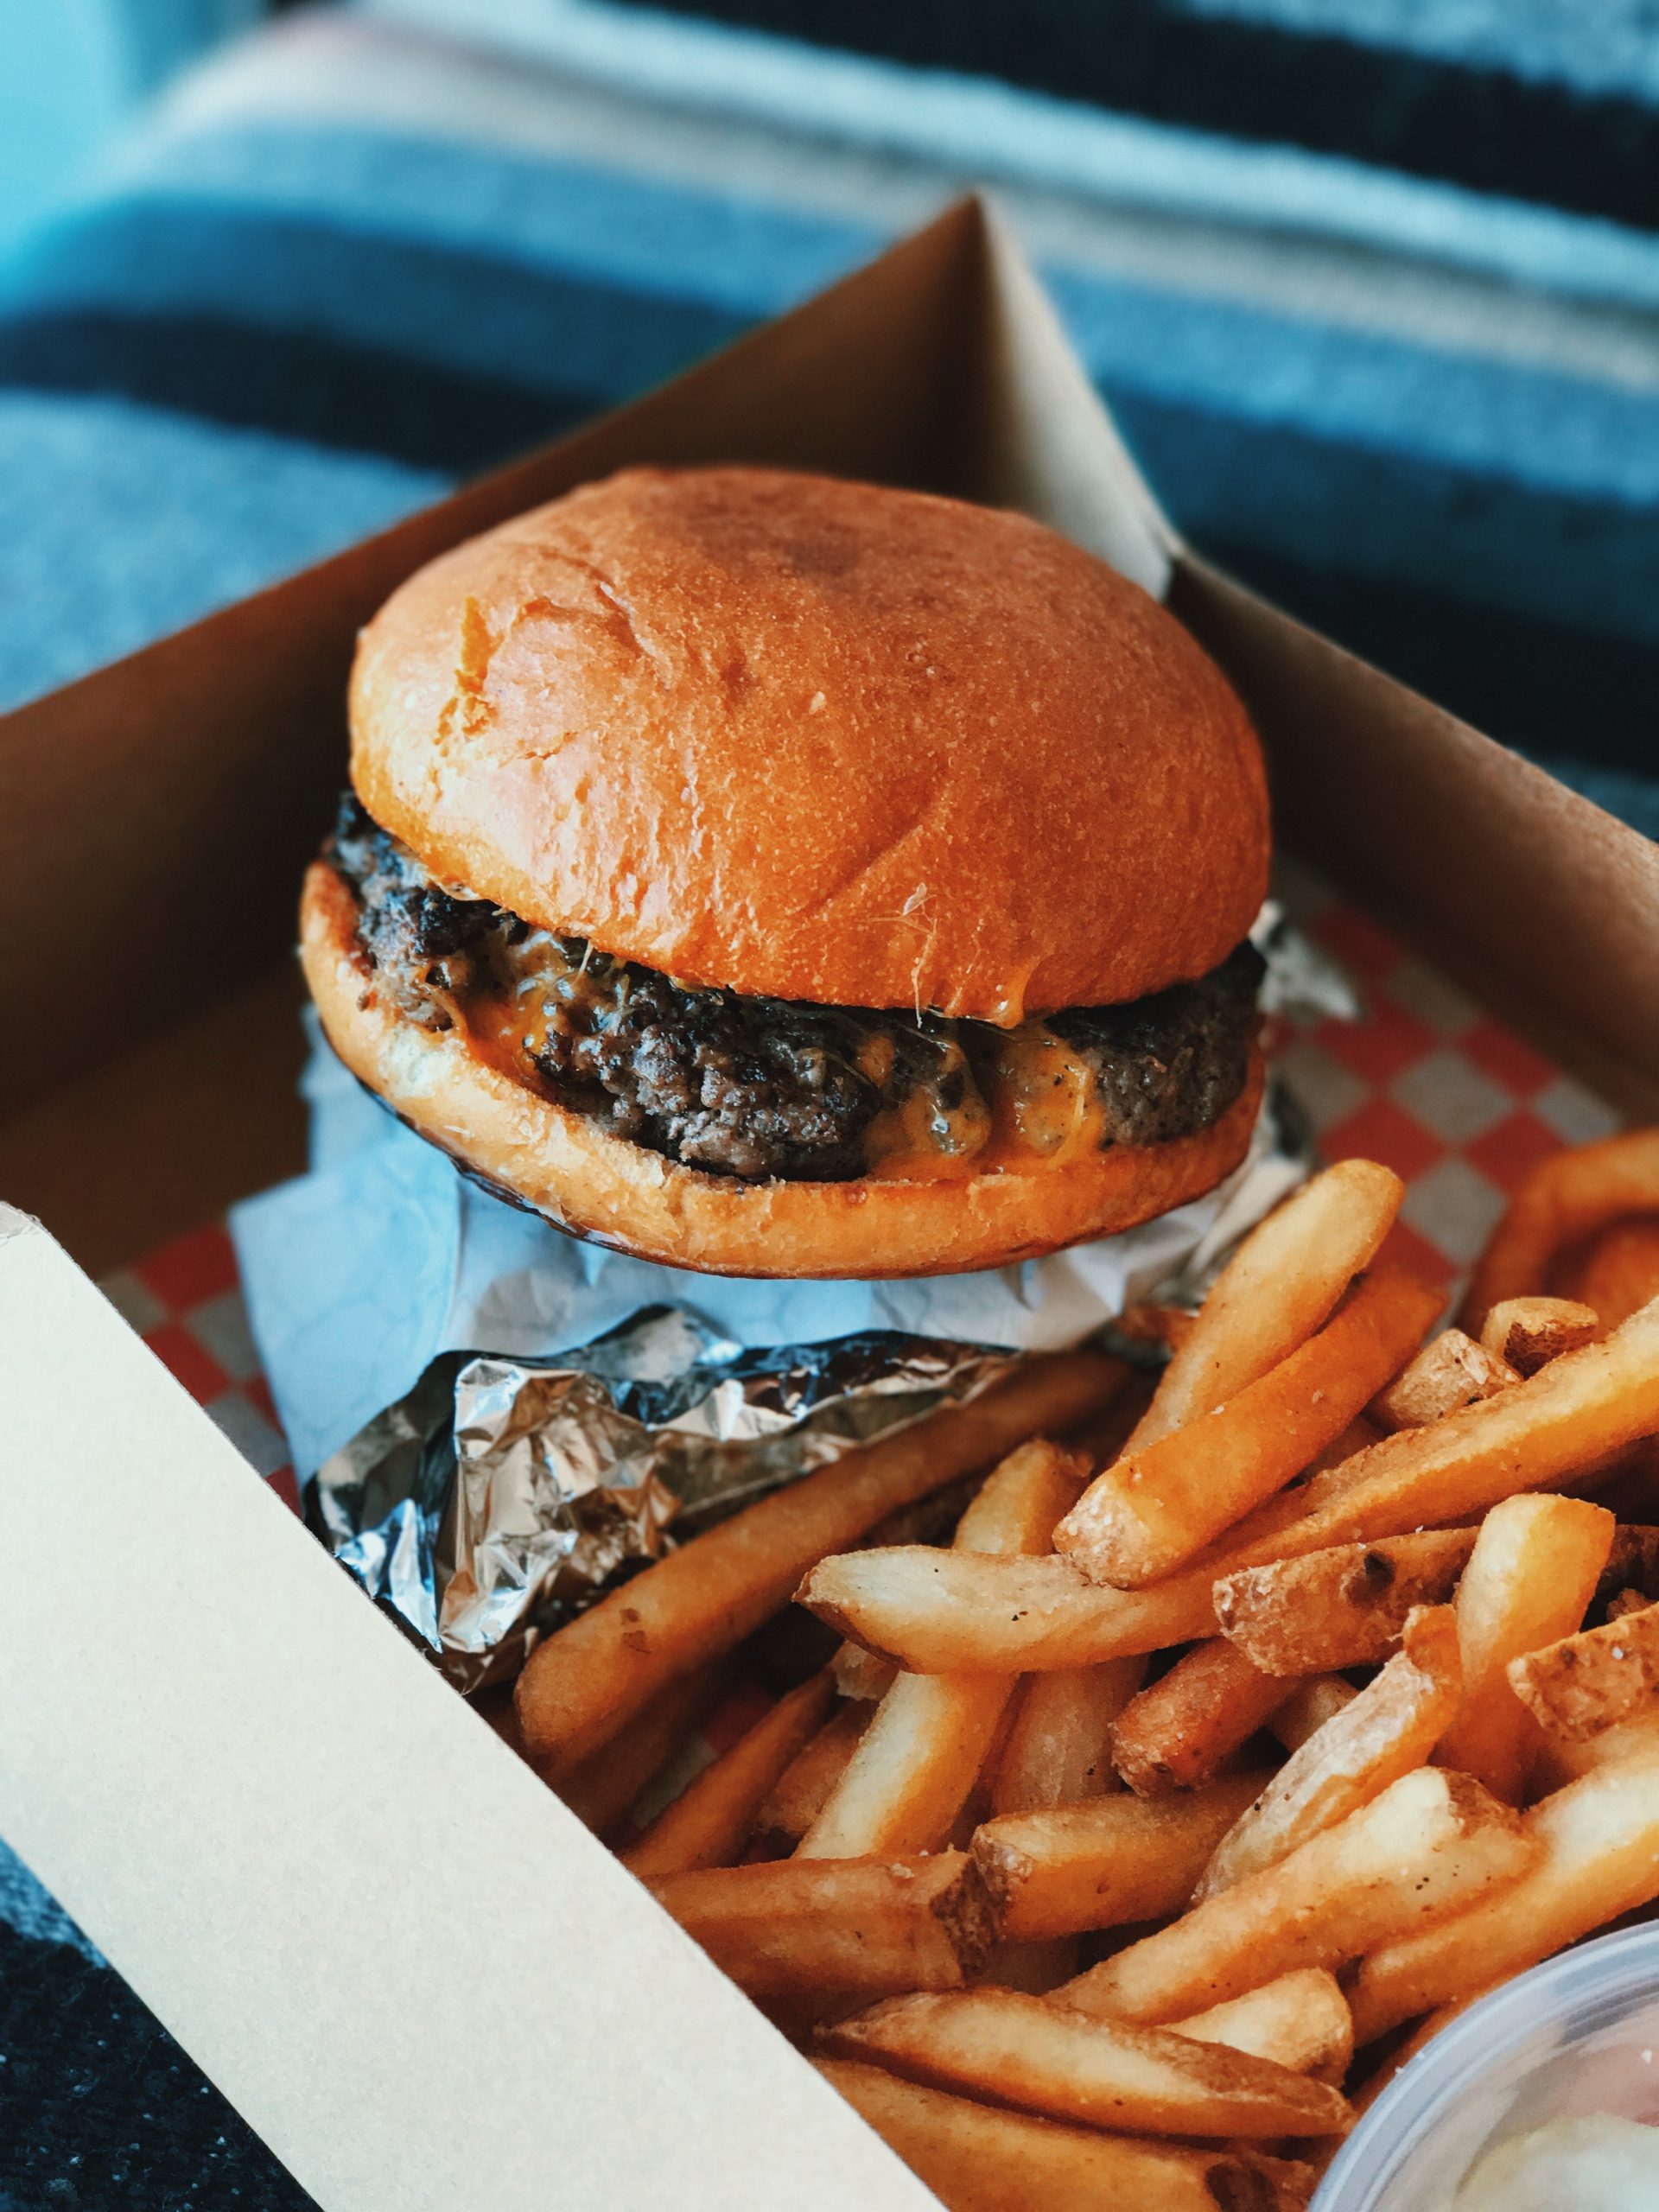 Image shows a cheeseburger and fries in a cardboard lunchbox.